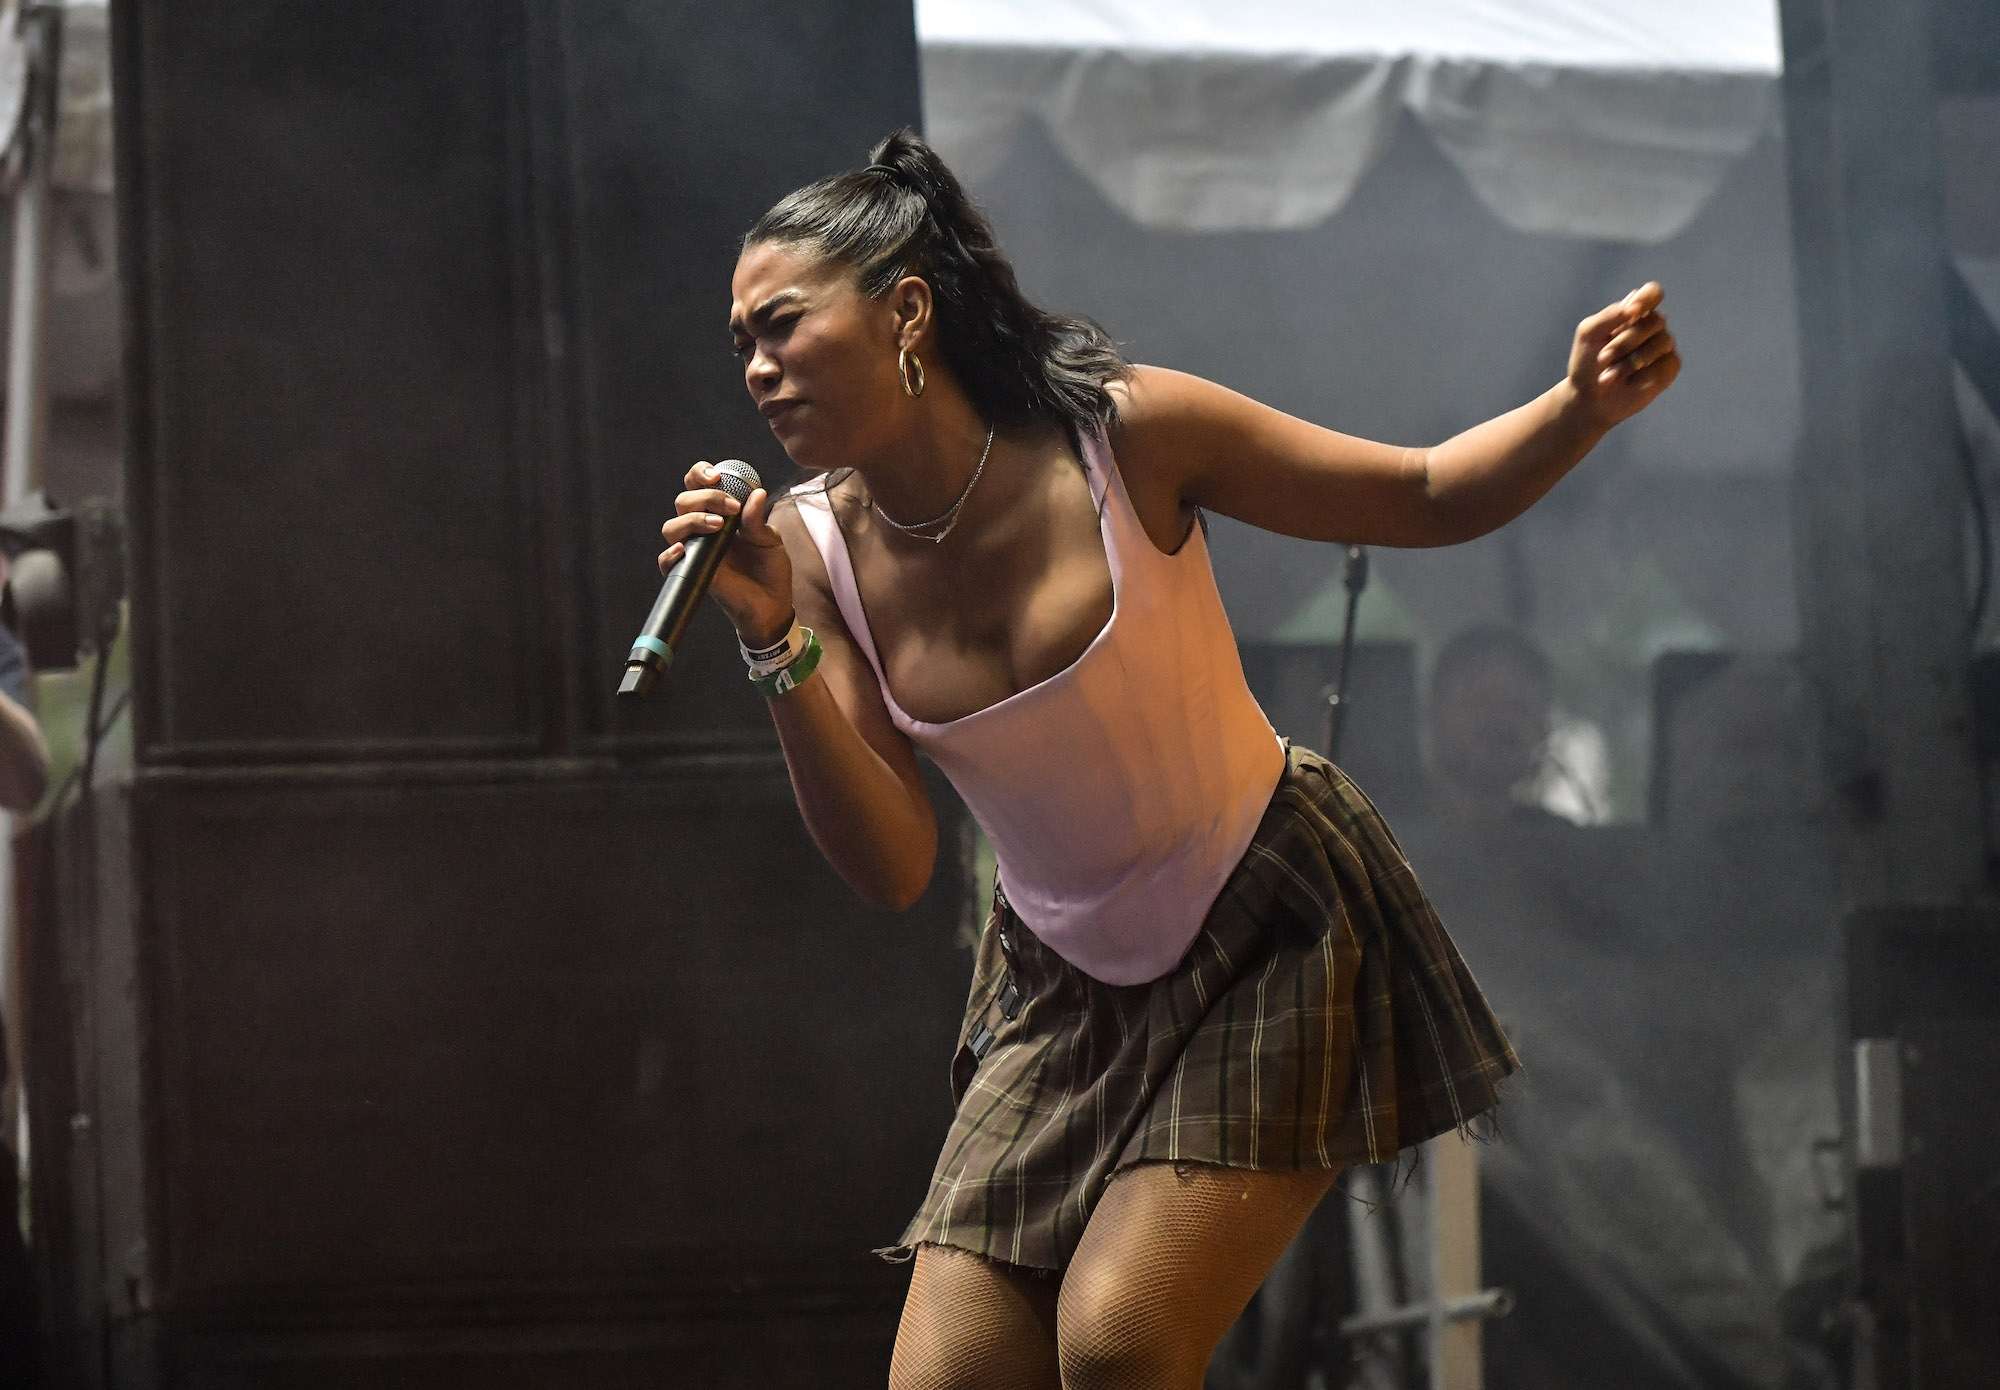 Amber Mark Live At Pitchfork [GALLERY] 4